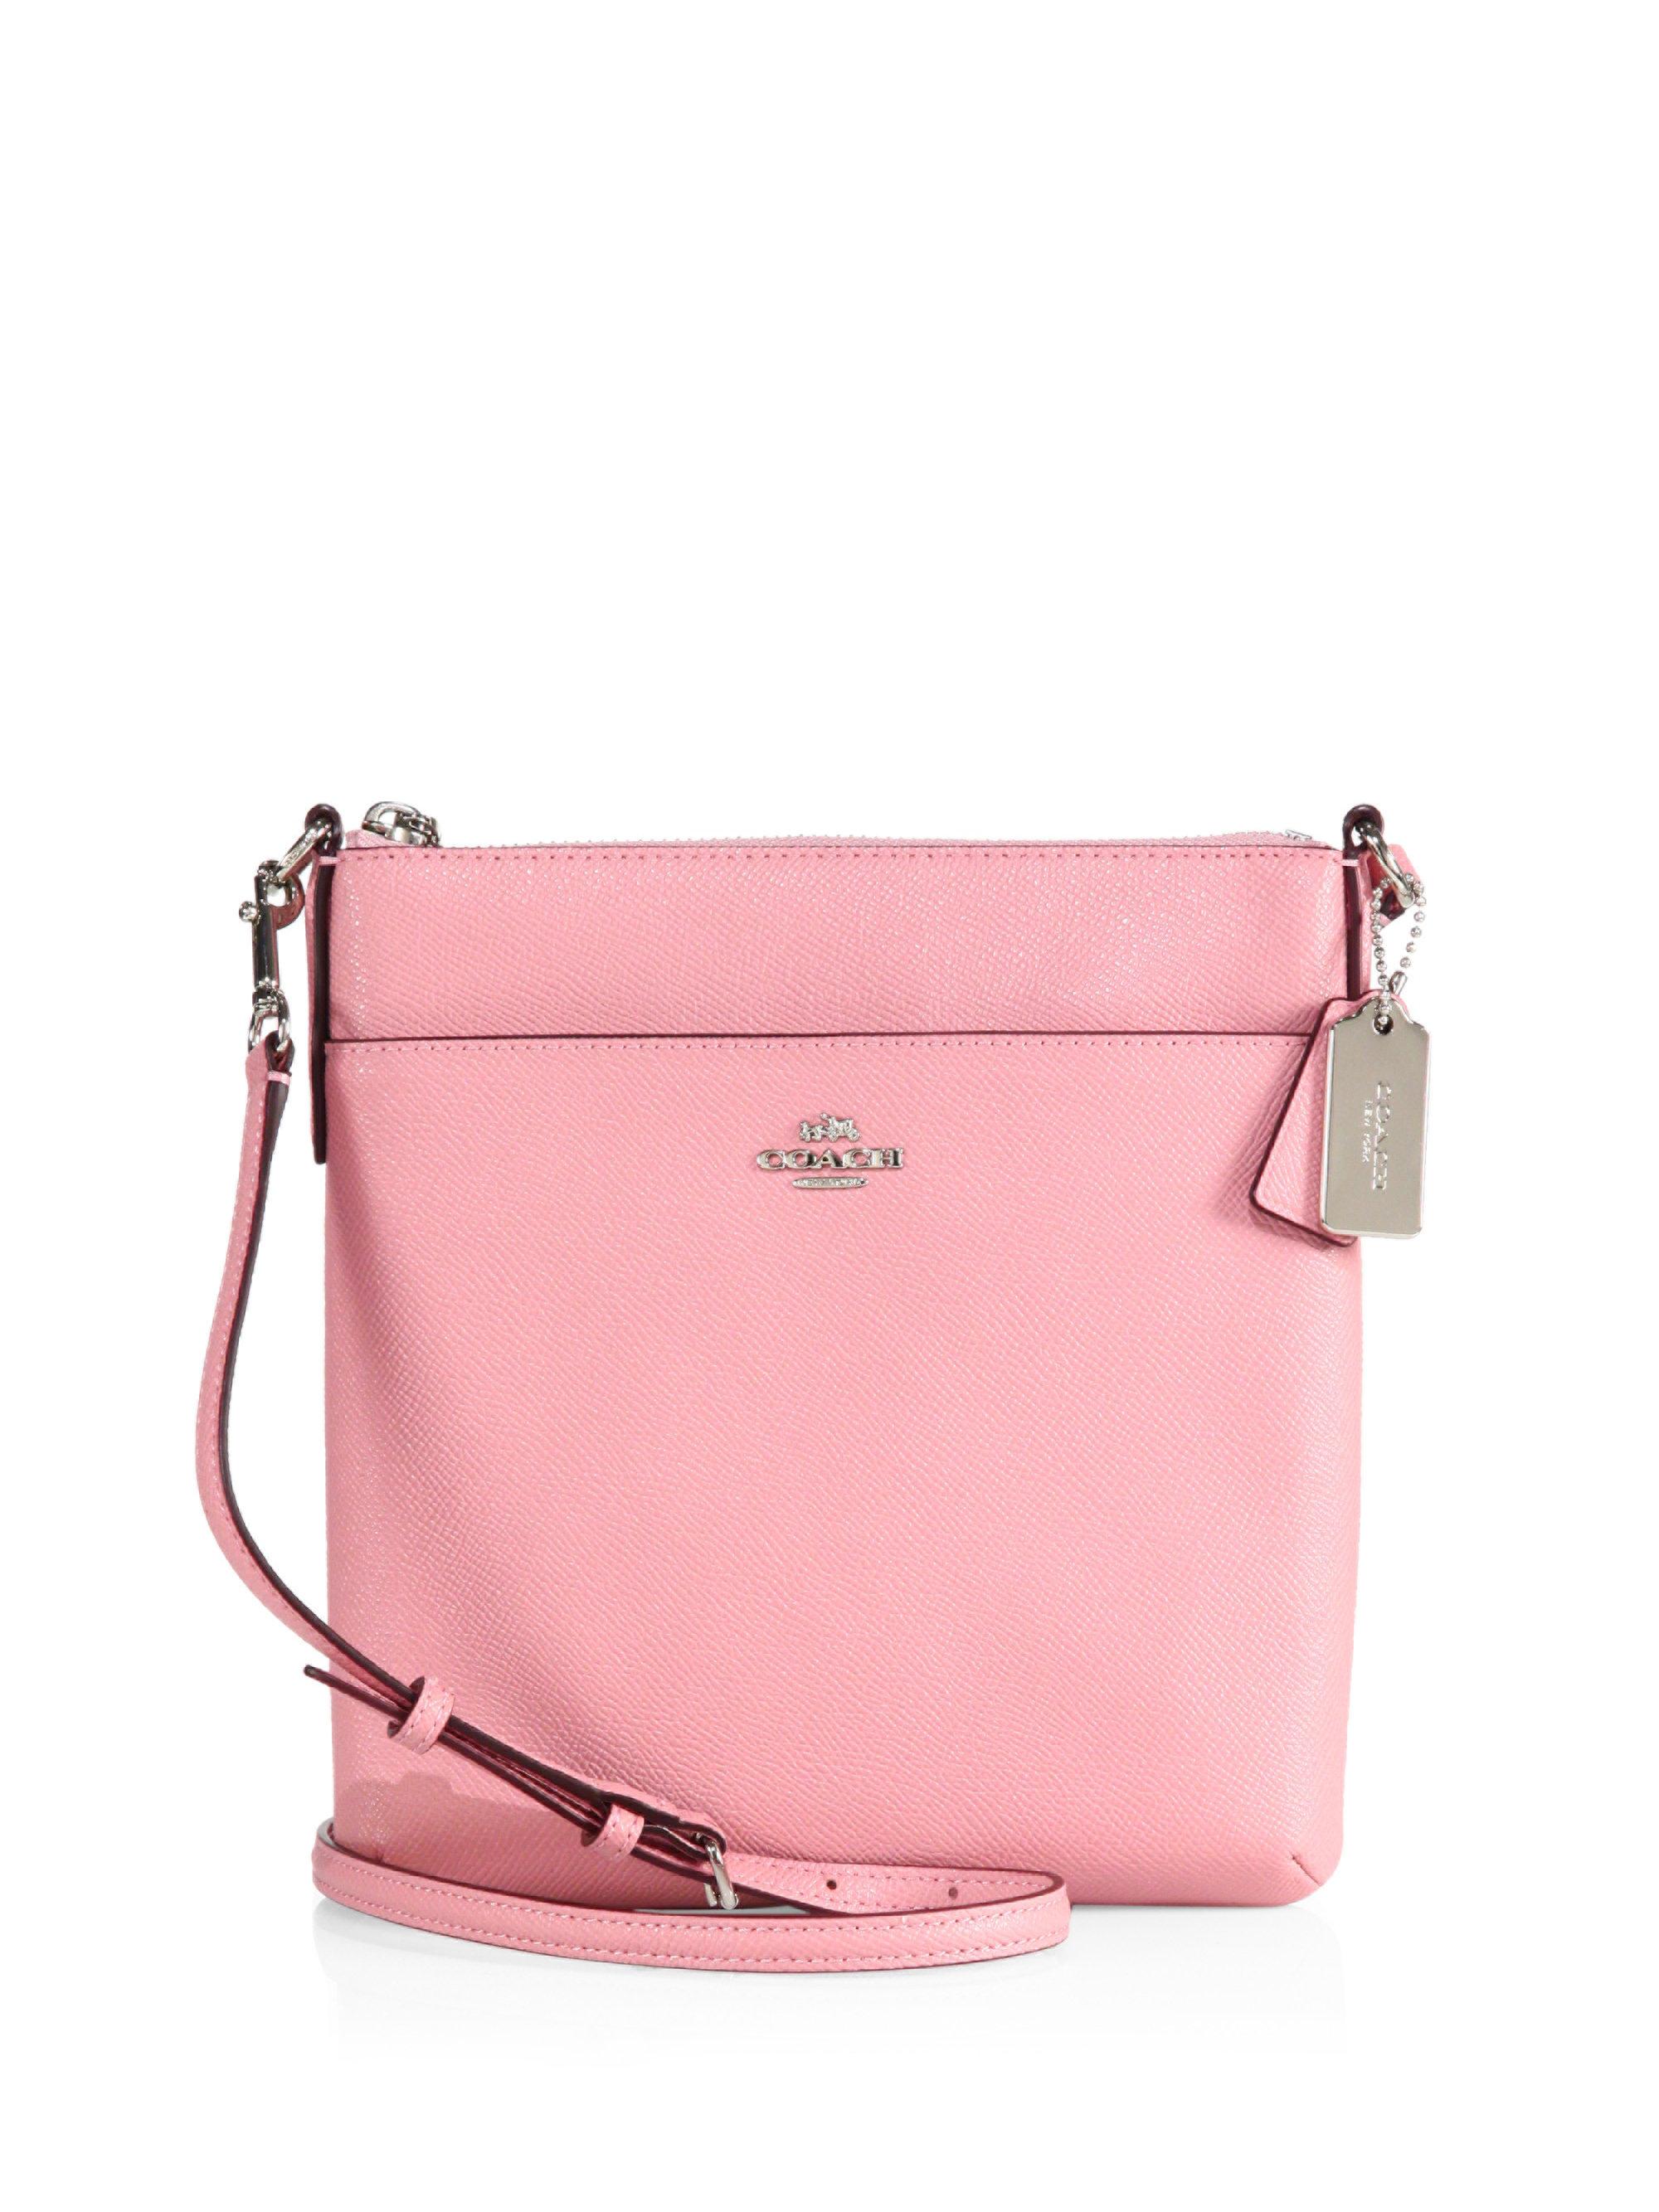 Lyst - Coach Courier Grosgrain Leather Crossbody Bag in Pink